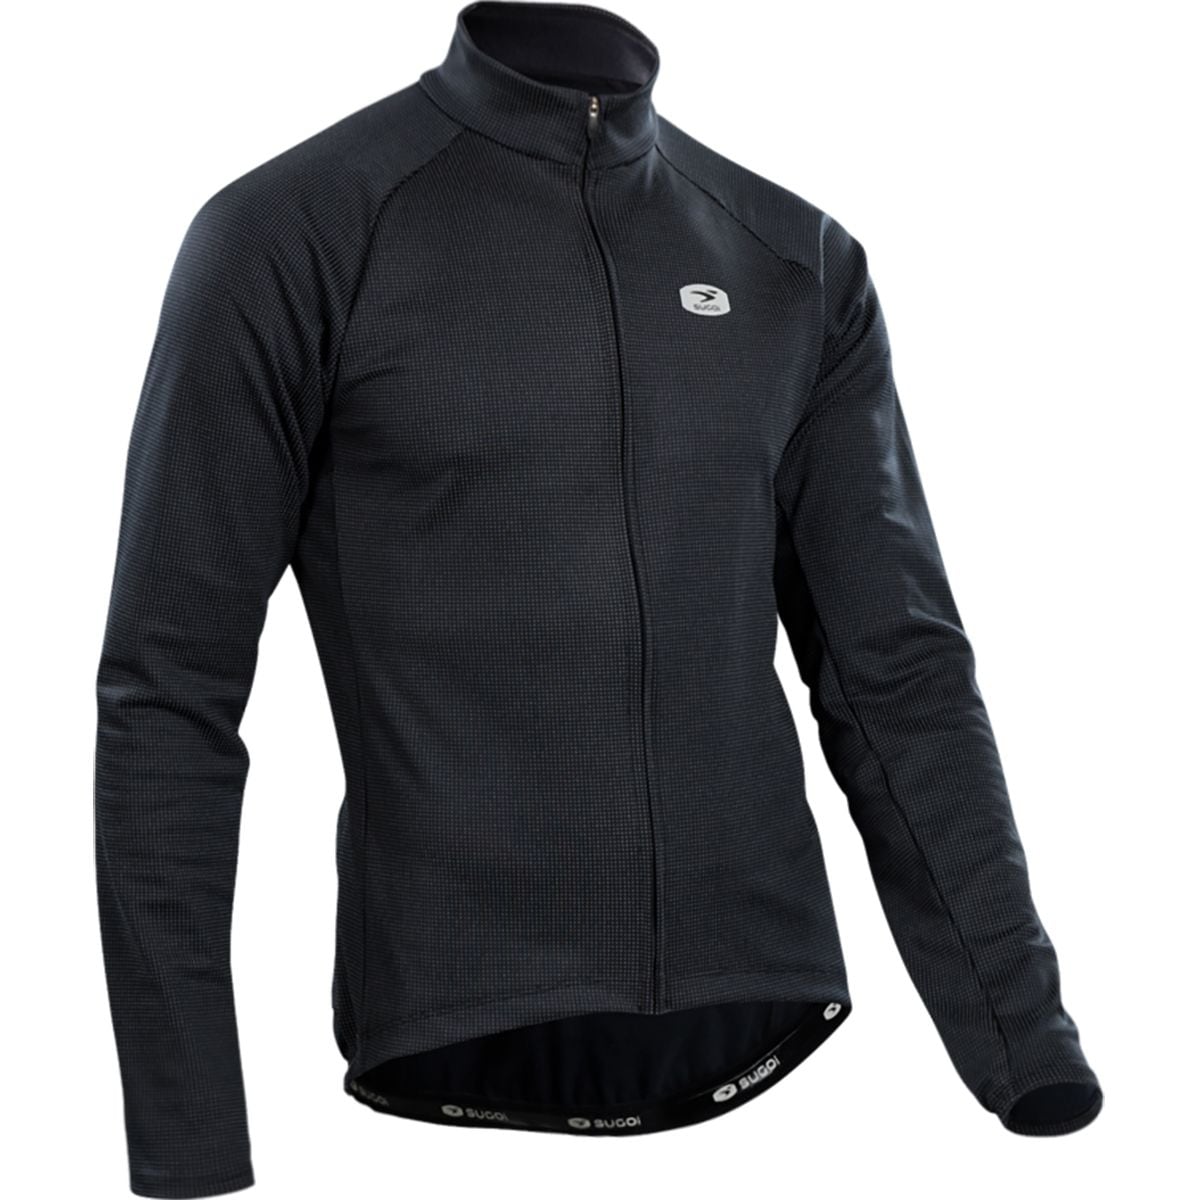 SUGOi Zap Thermal Long-Sleeve Jersey - Men's